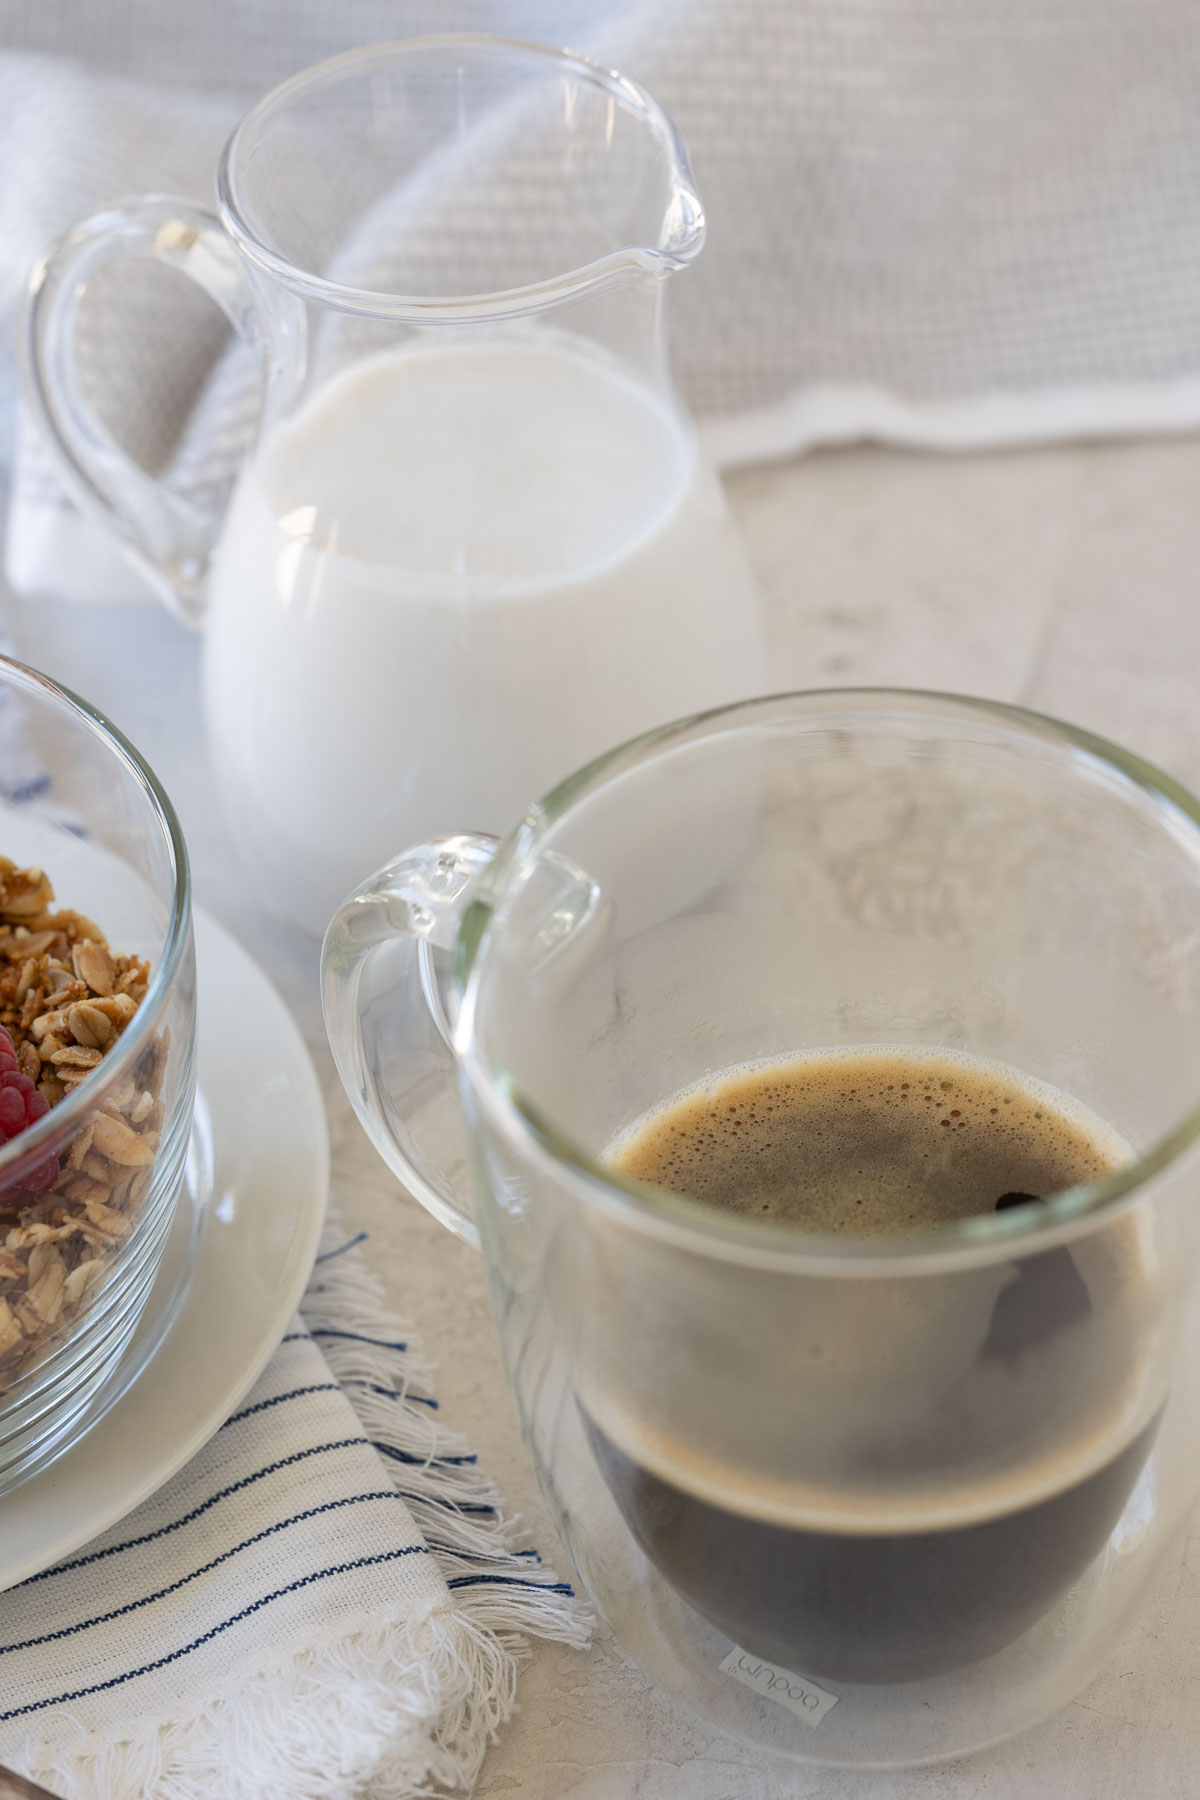 Breakfast setting with granola, berries, coffee and pitcher of milk.